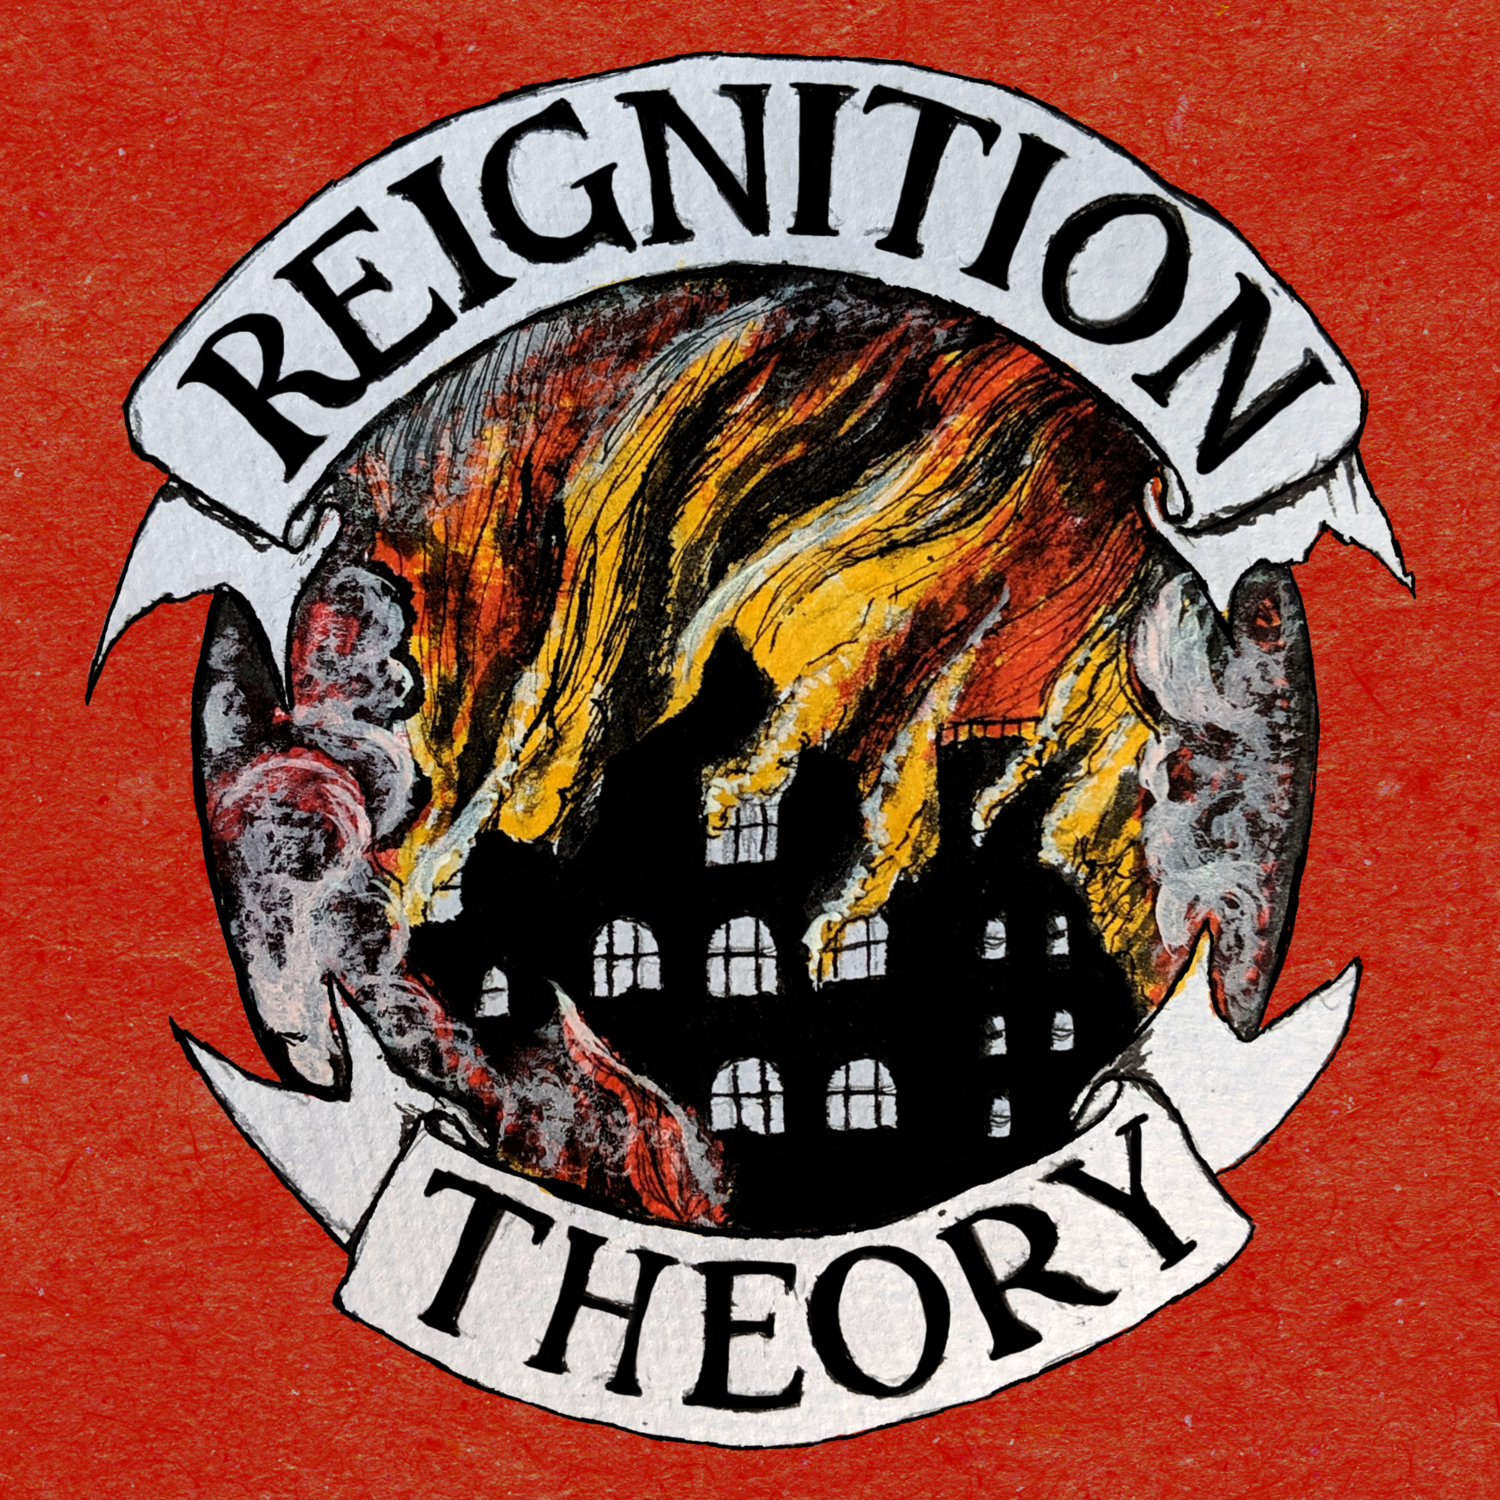 Episode 7 - Invitation - The Reignition Theory